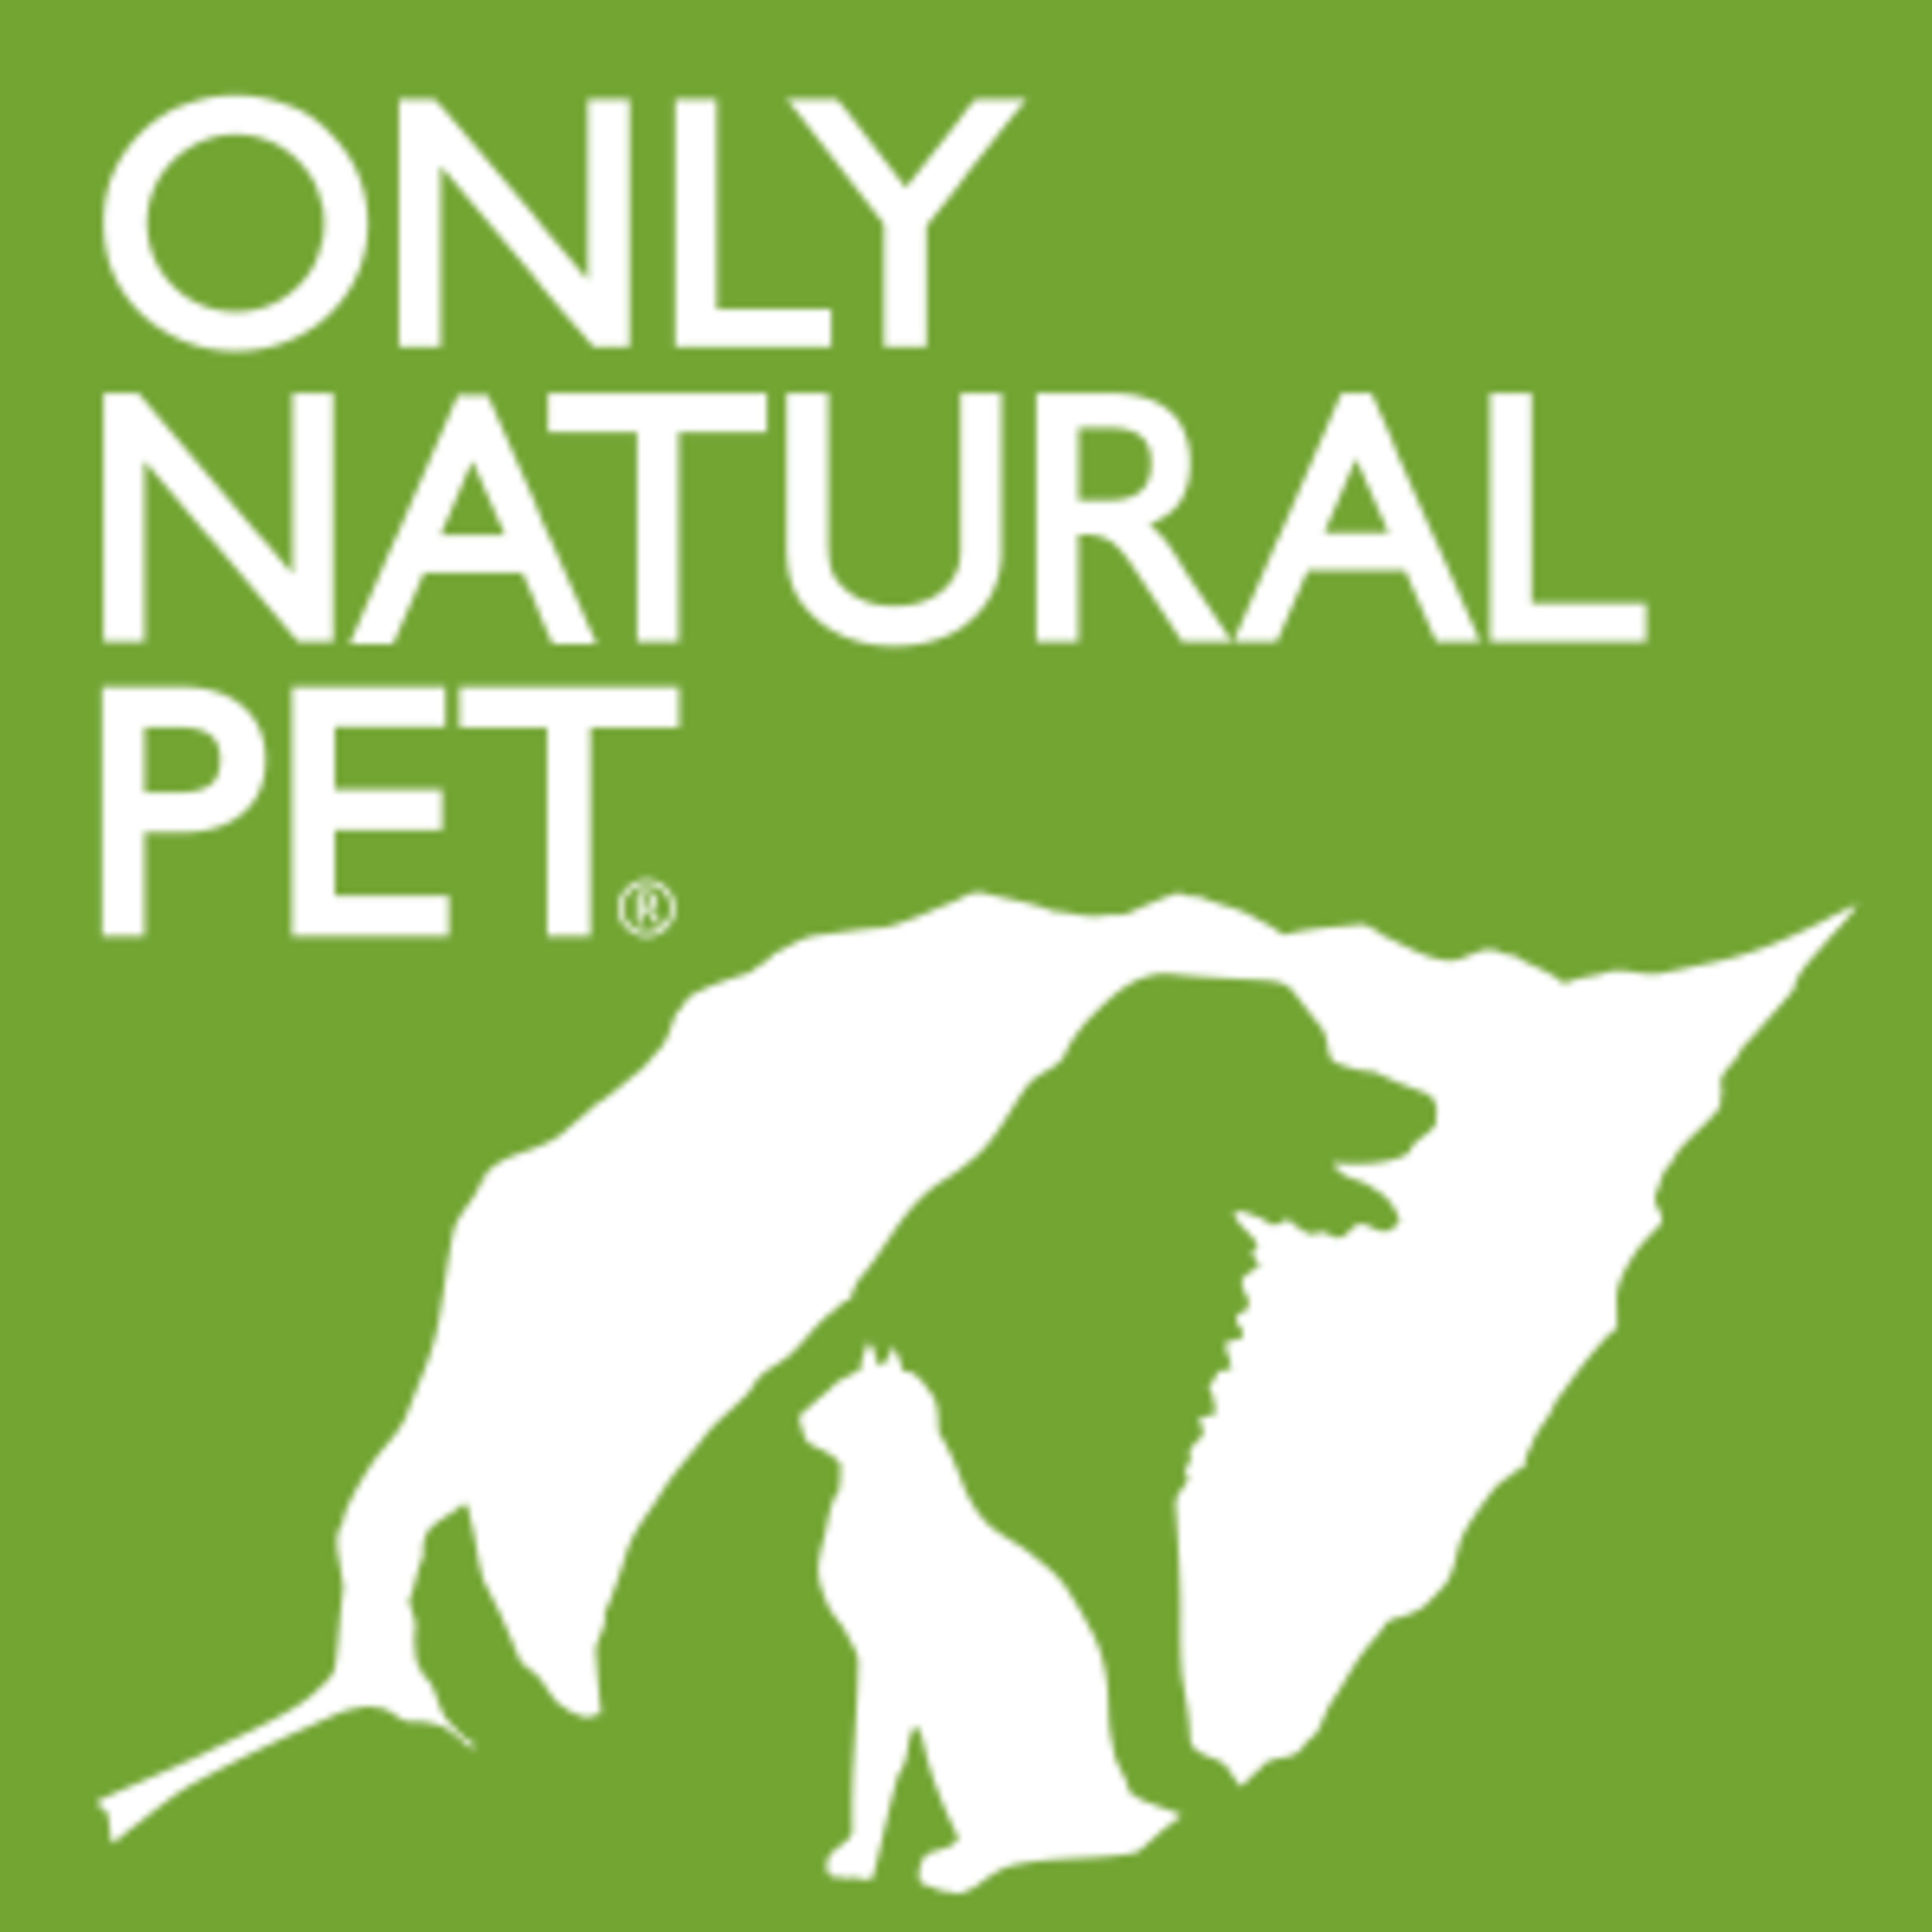 Only Natural PetCode